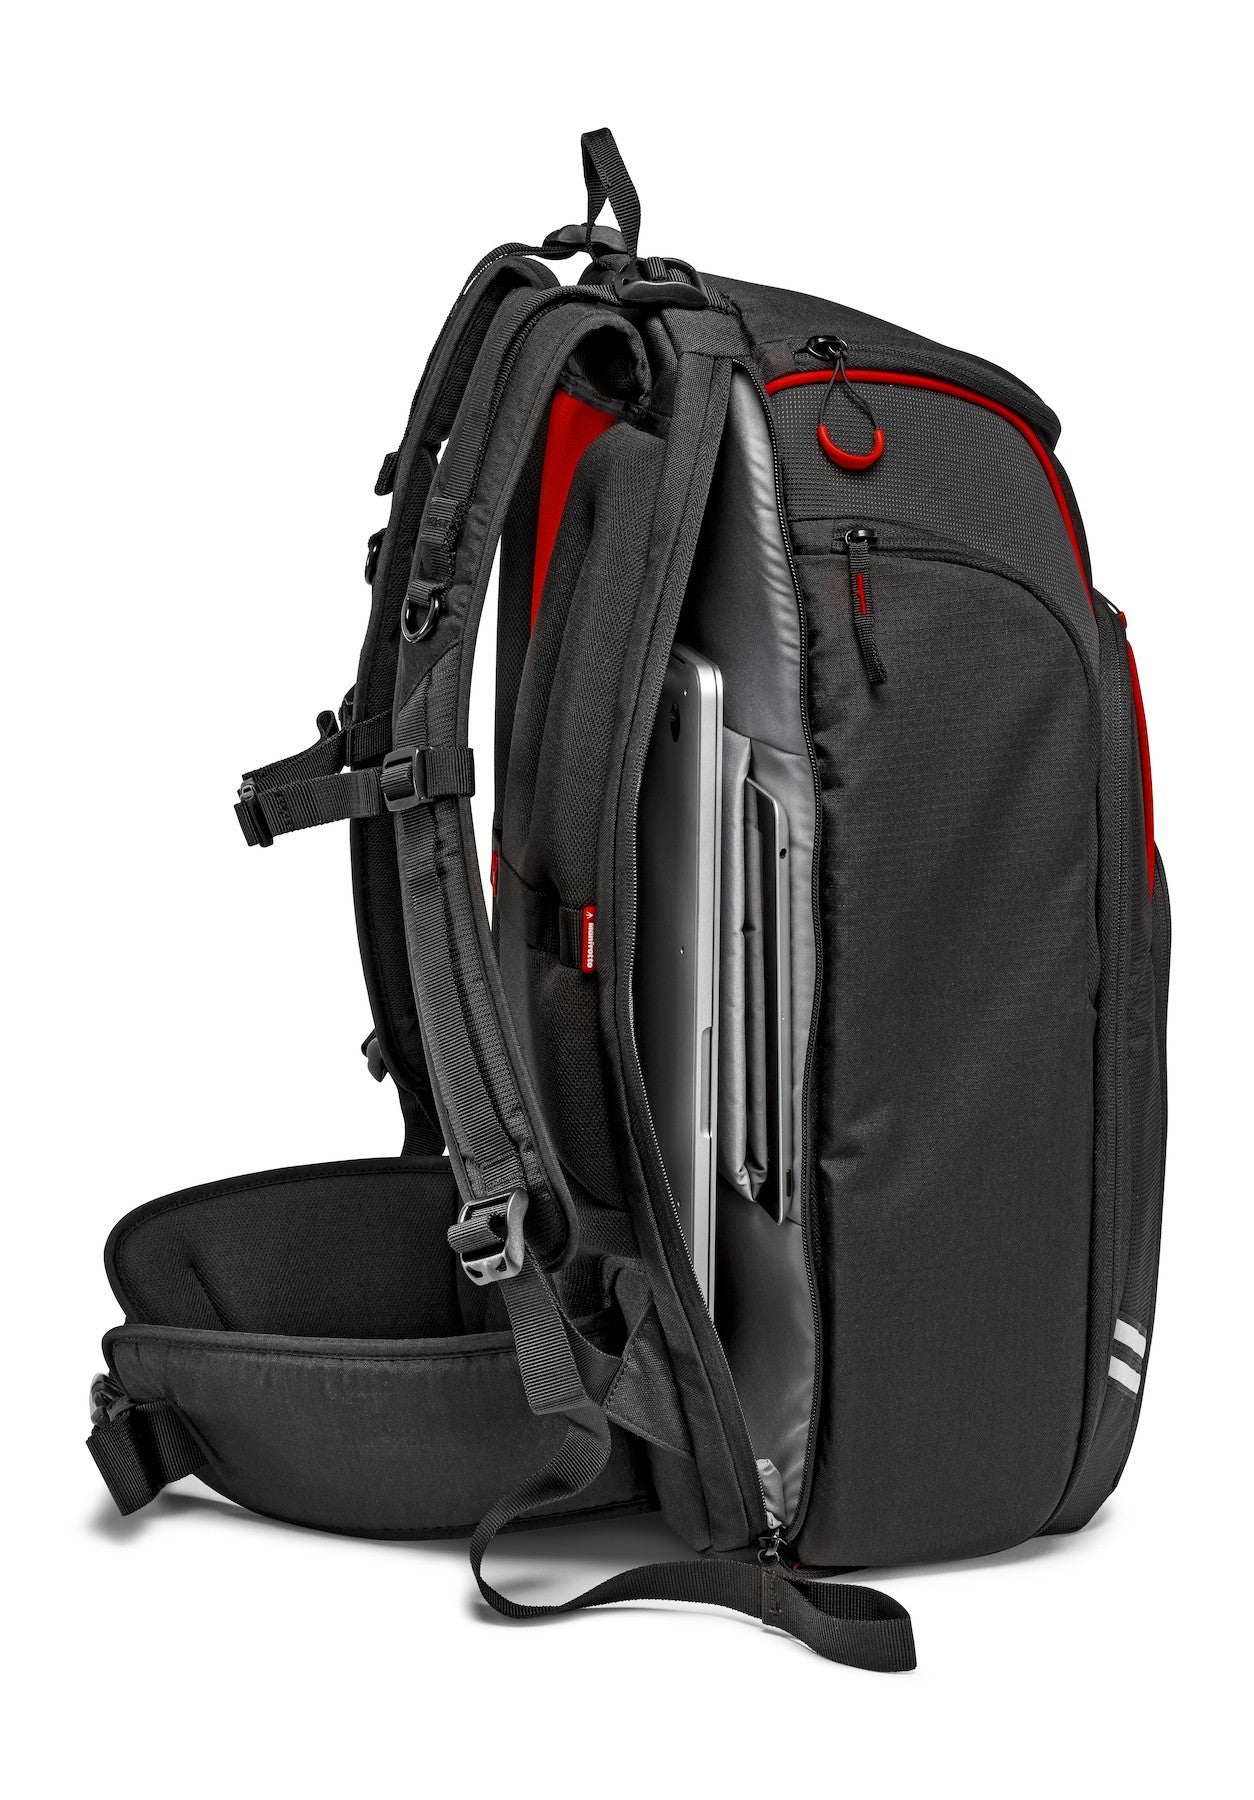 Manfrotto MB BP-D1 Drone Backpack, bags backpacks, Manfrotto - Pictureline  - 7